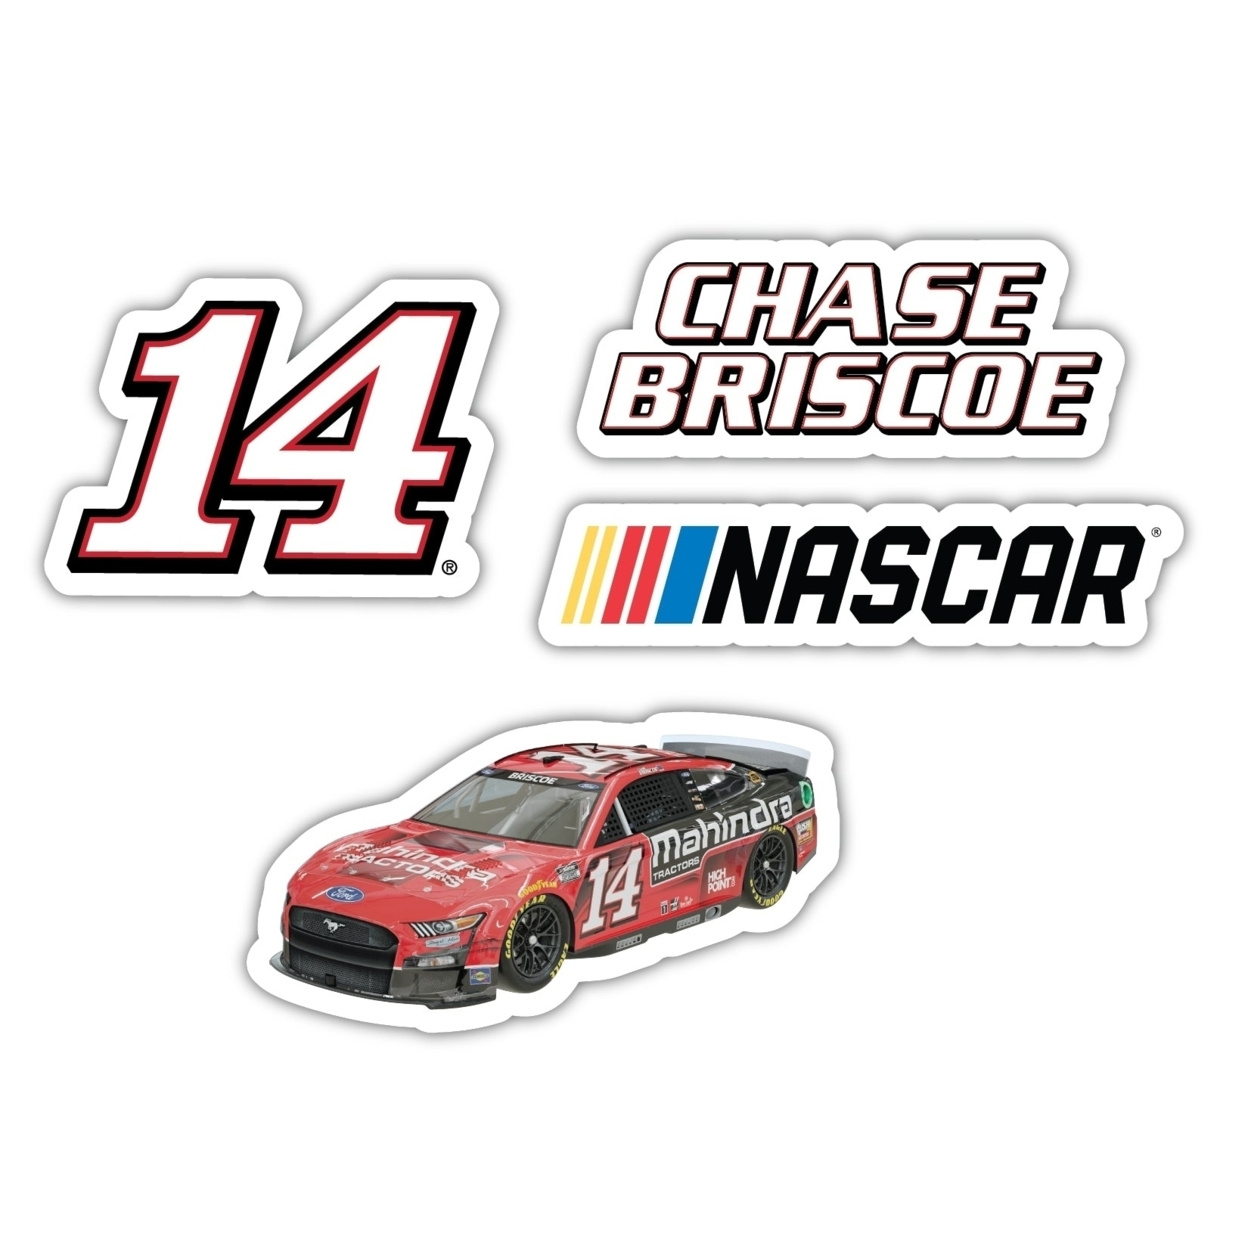 Chase Briscoe #14 NASCAR Cup Series 4 Pack Laser Cut Decal